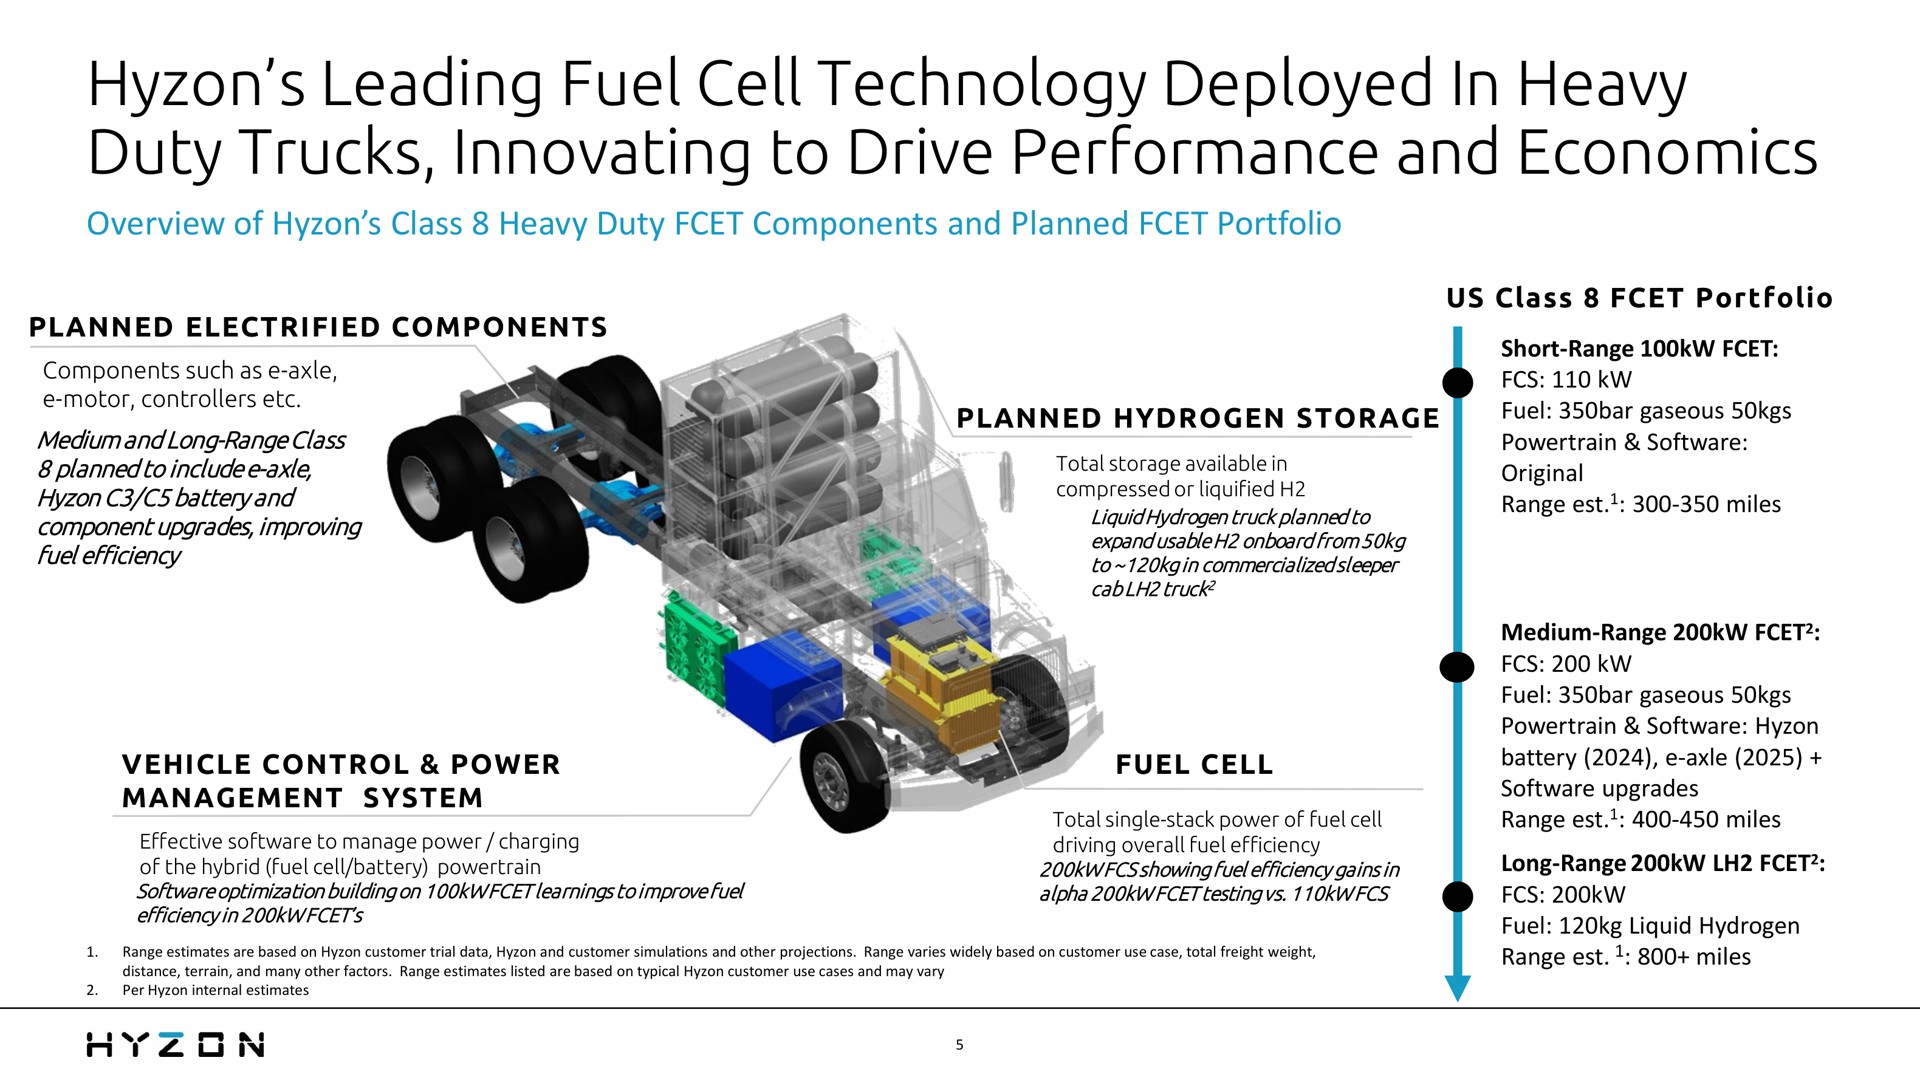 leading fuel cell technology deployed in heavy duty trucks innovating to drive performance and economics | Hyzon